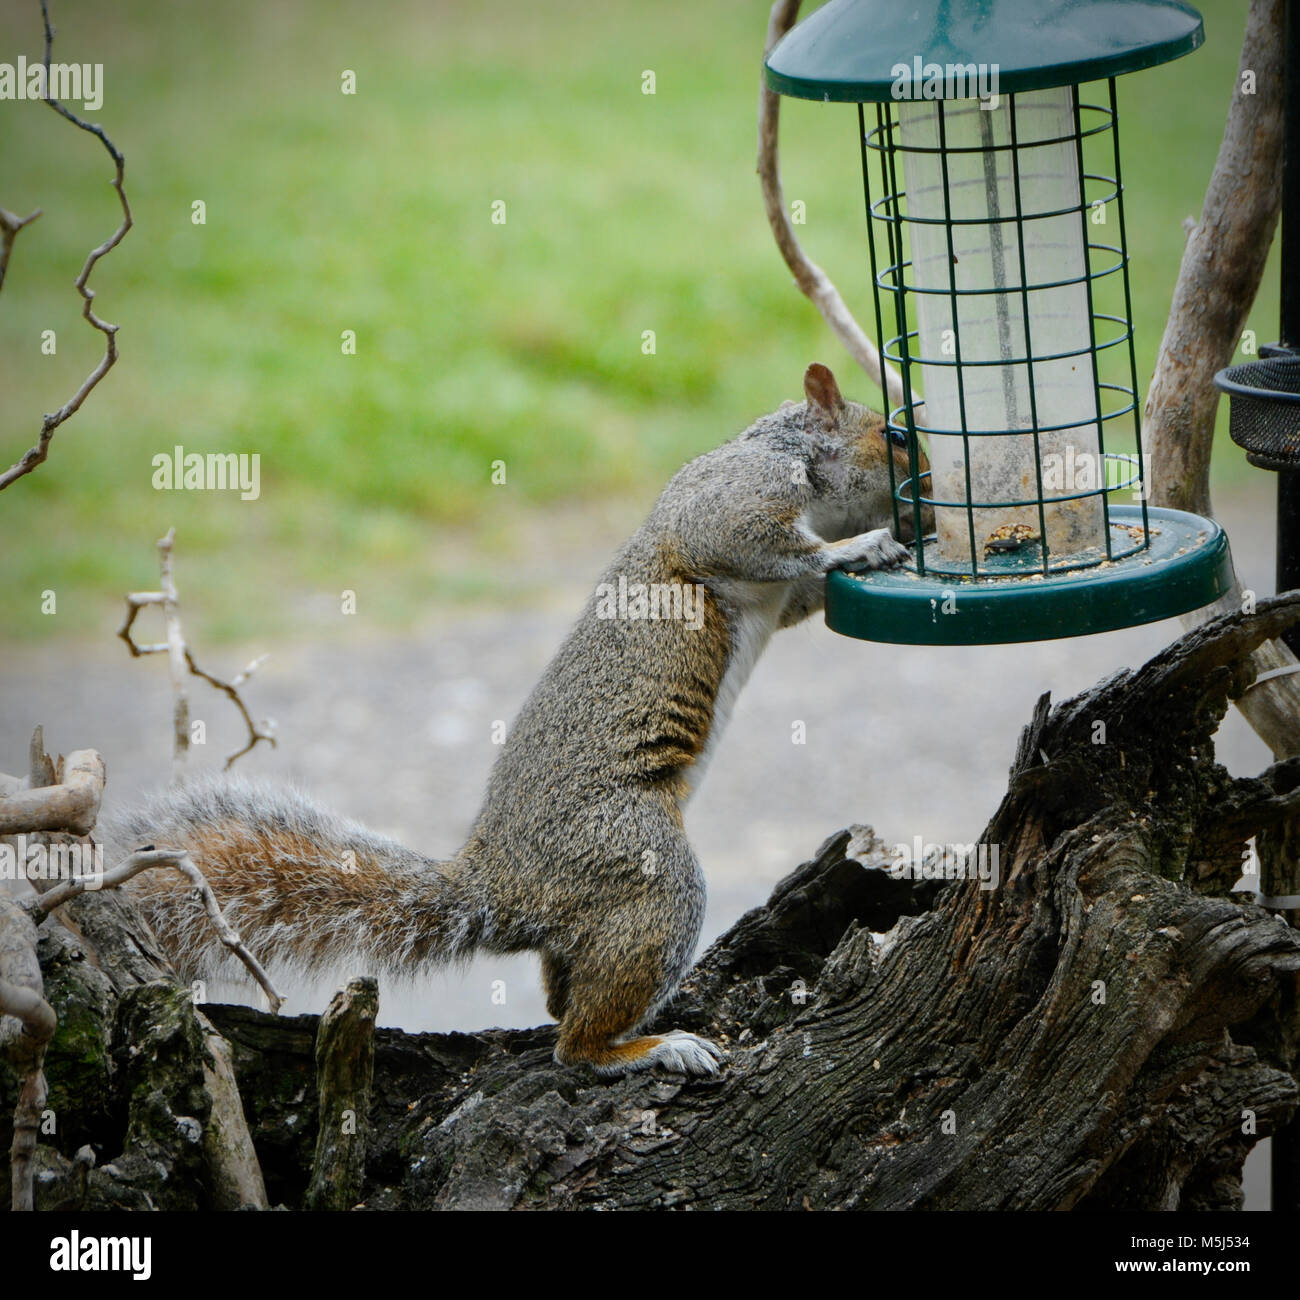 Sciurus carolinensis, common name eastern gray squirrel or grey squirrel depending on region, is a tree squirrel in the genus Sciurus. It is native to eastern North America, where it is the most prodigious and ecologically essential natural forest regenerator. Stock Photo